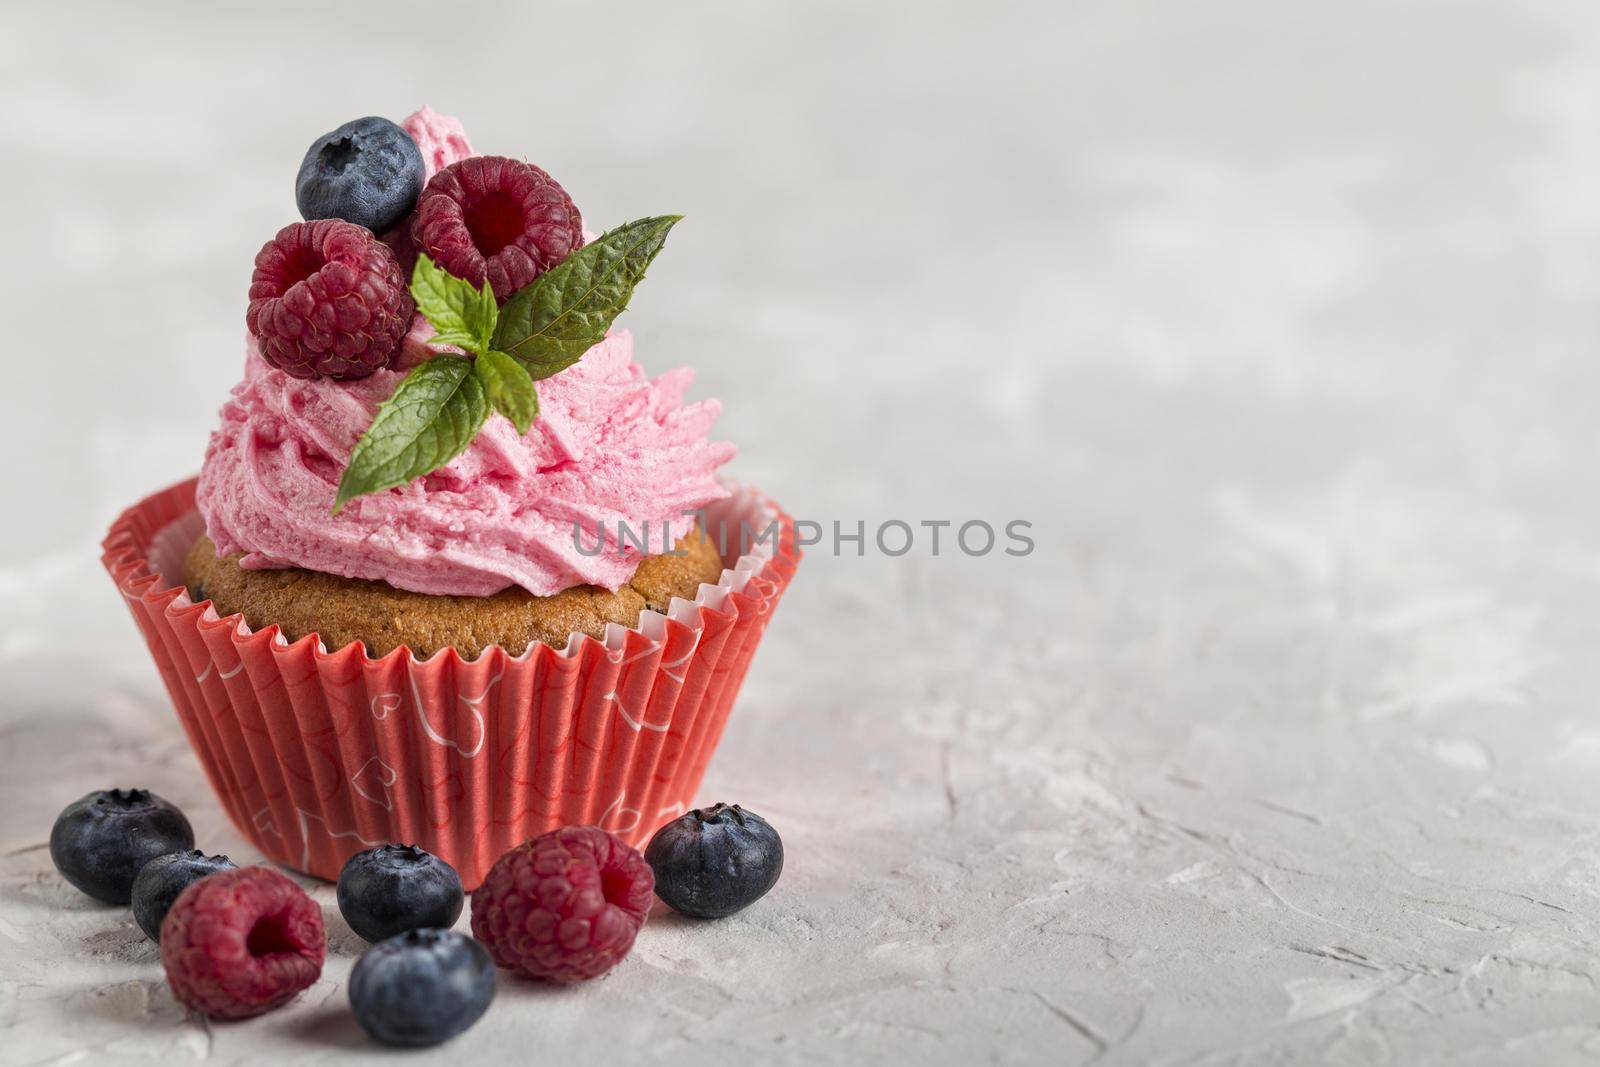 front view view tasty cupcake with strawberry cream. High quality beautiful photo concept by Zahard